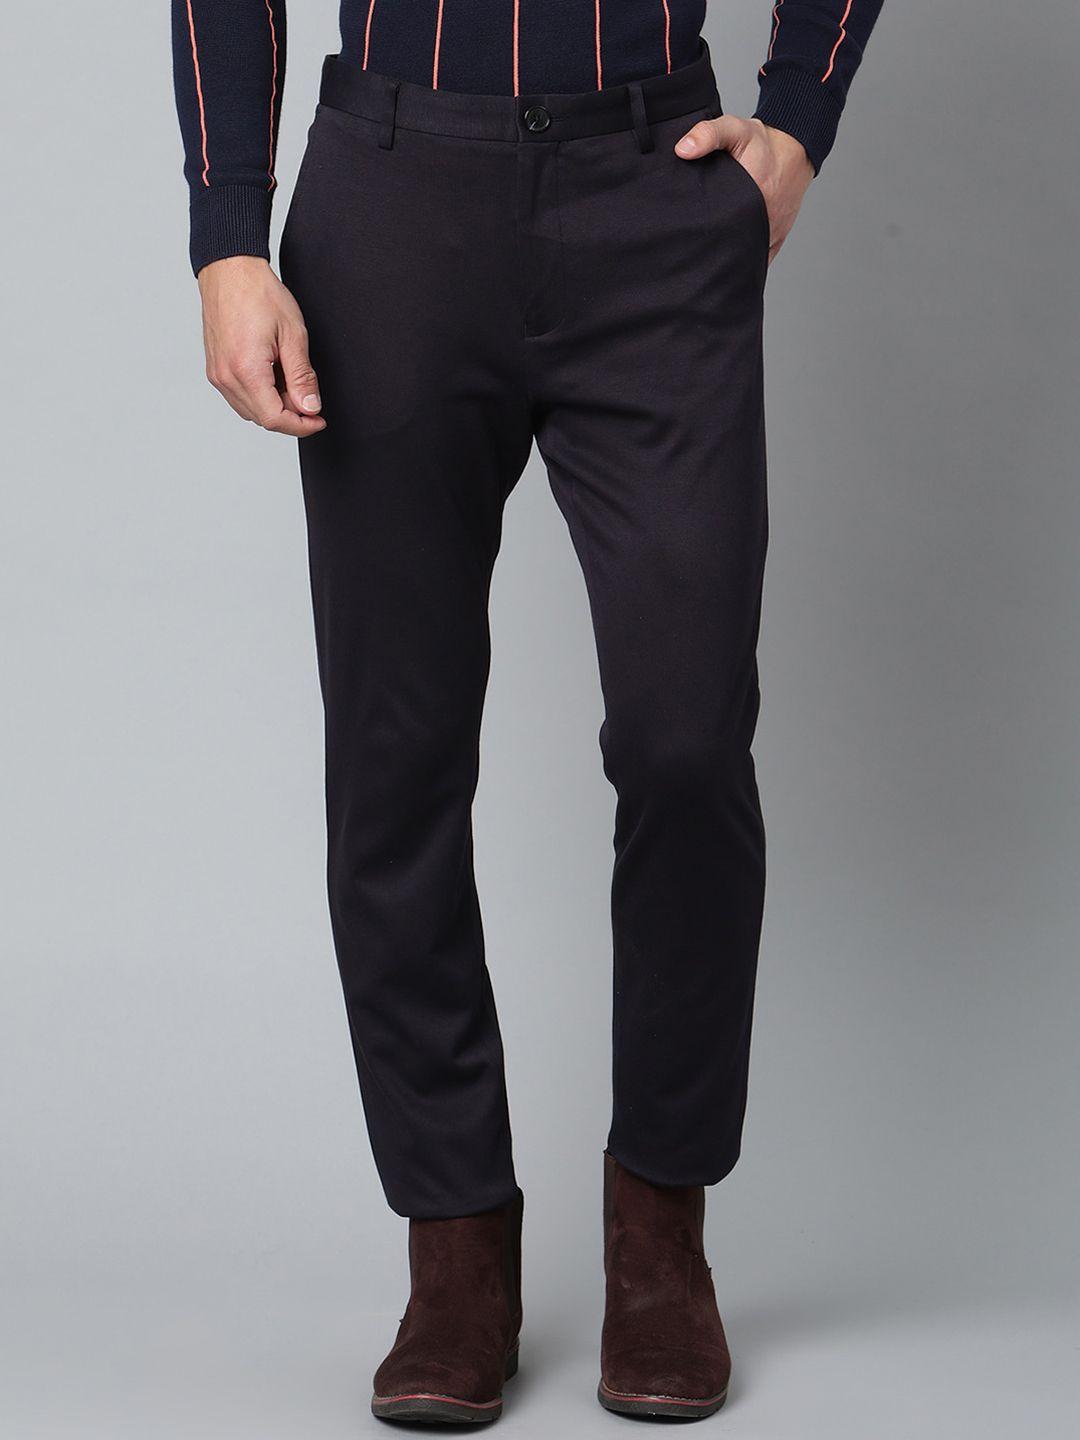 matinique men navy blue solid slim fit trousers